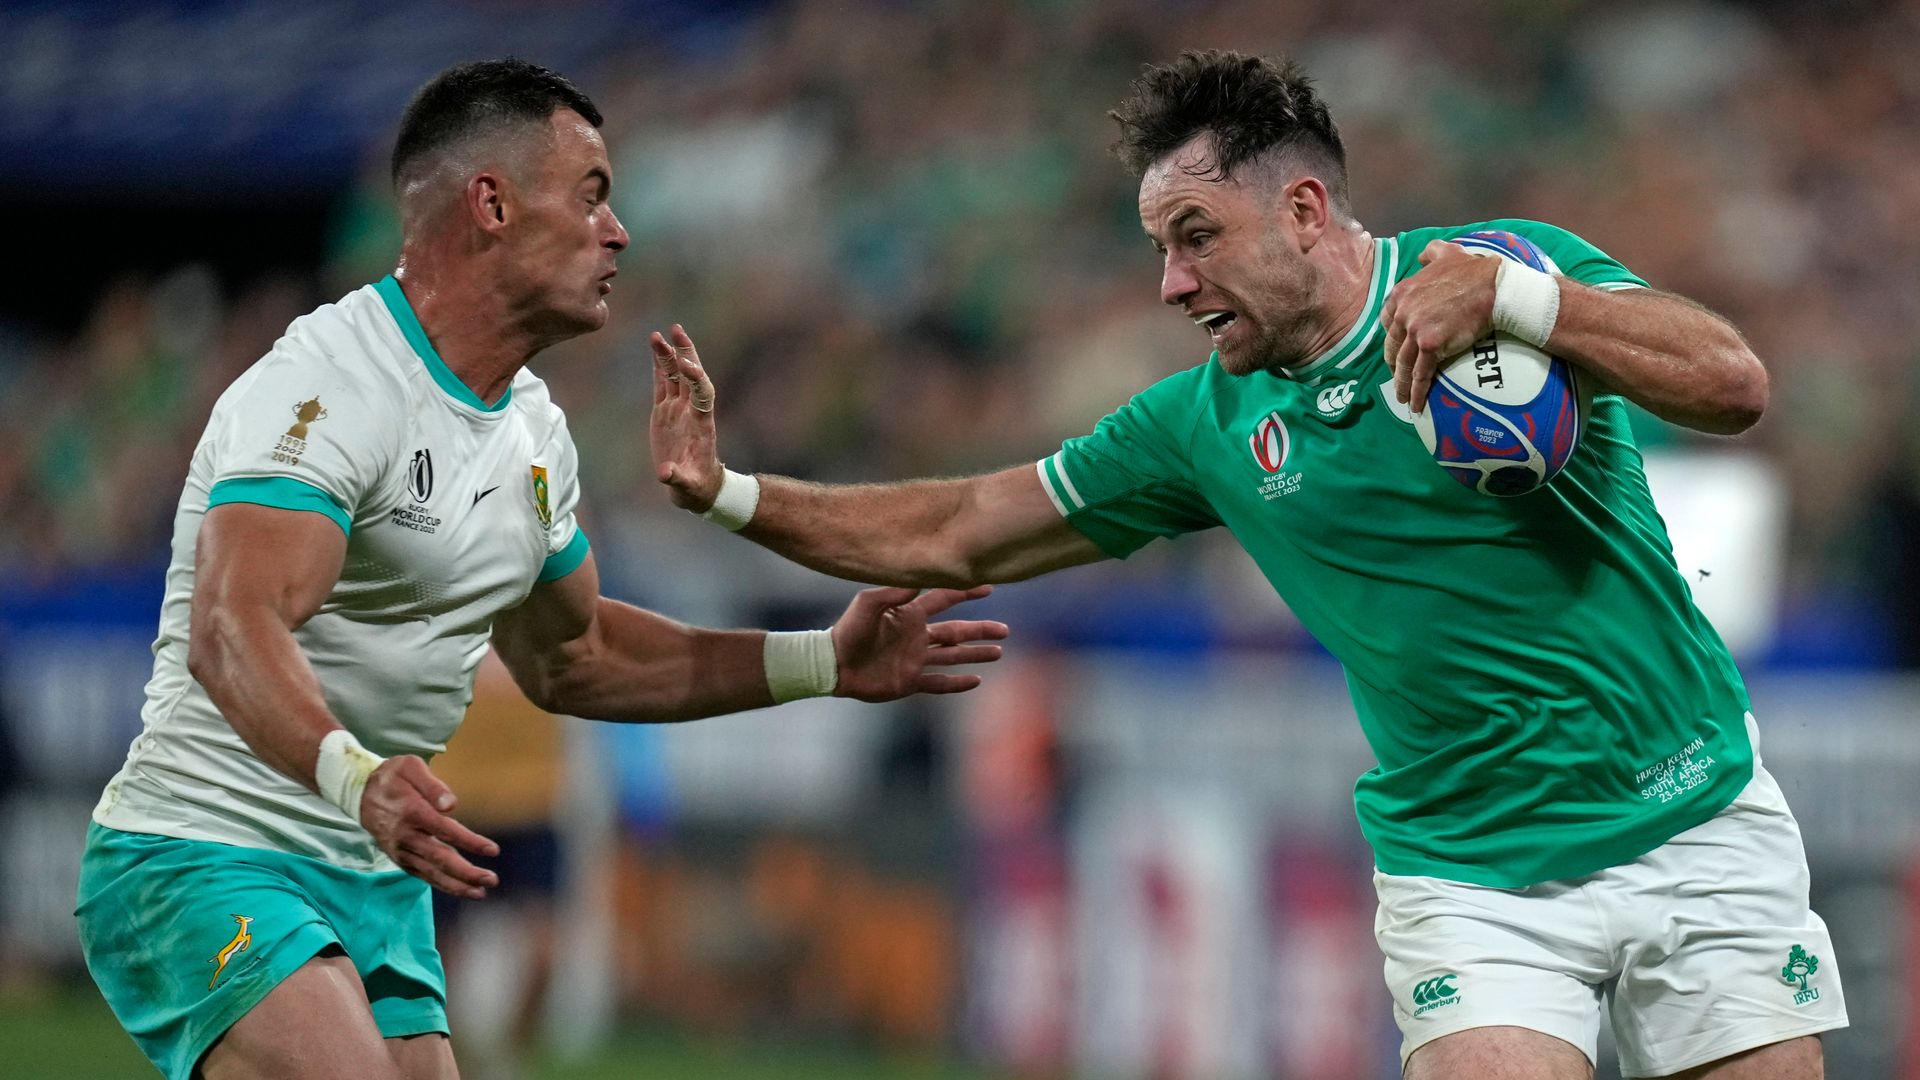 Keenan returns for Ireland with Ringrose and Ryan out